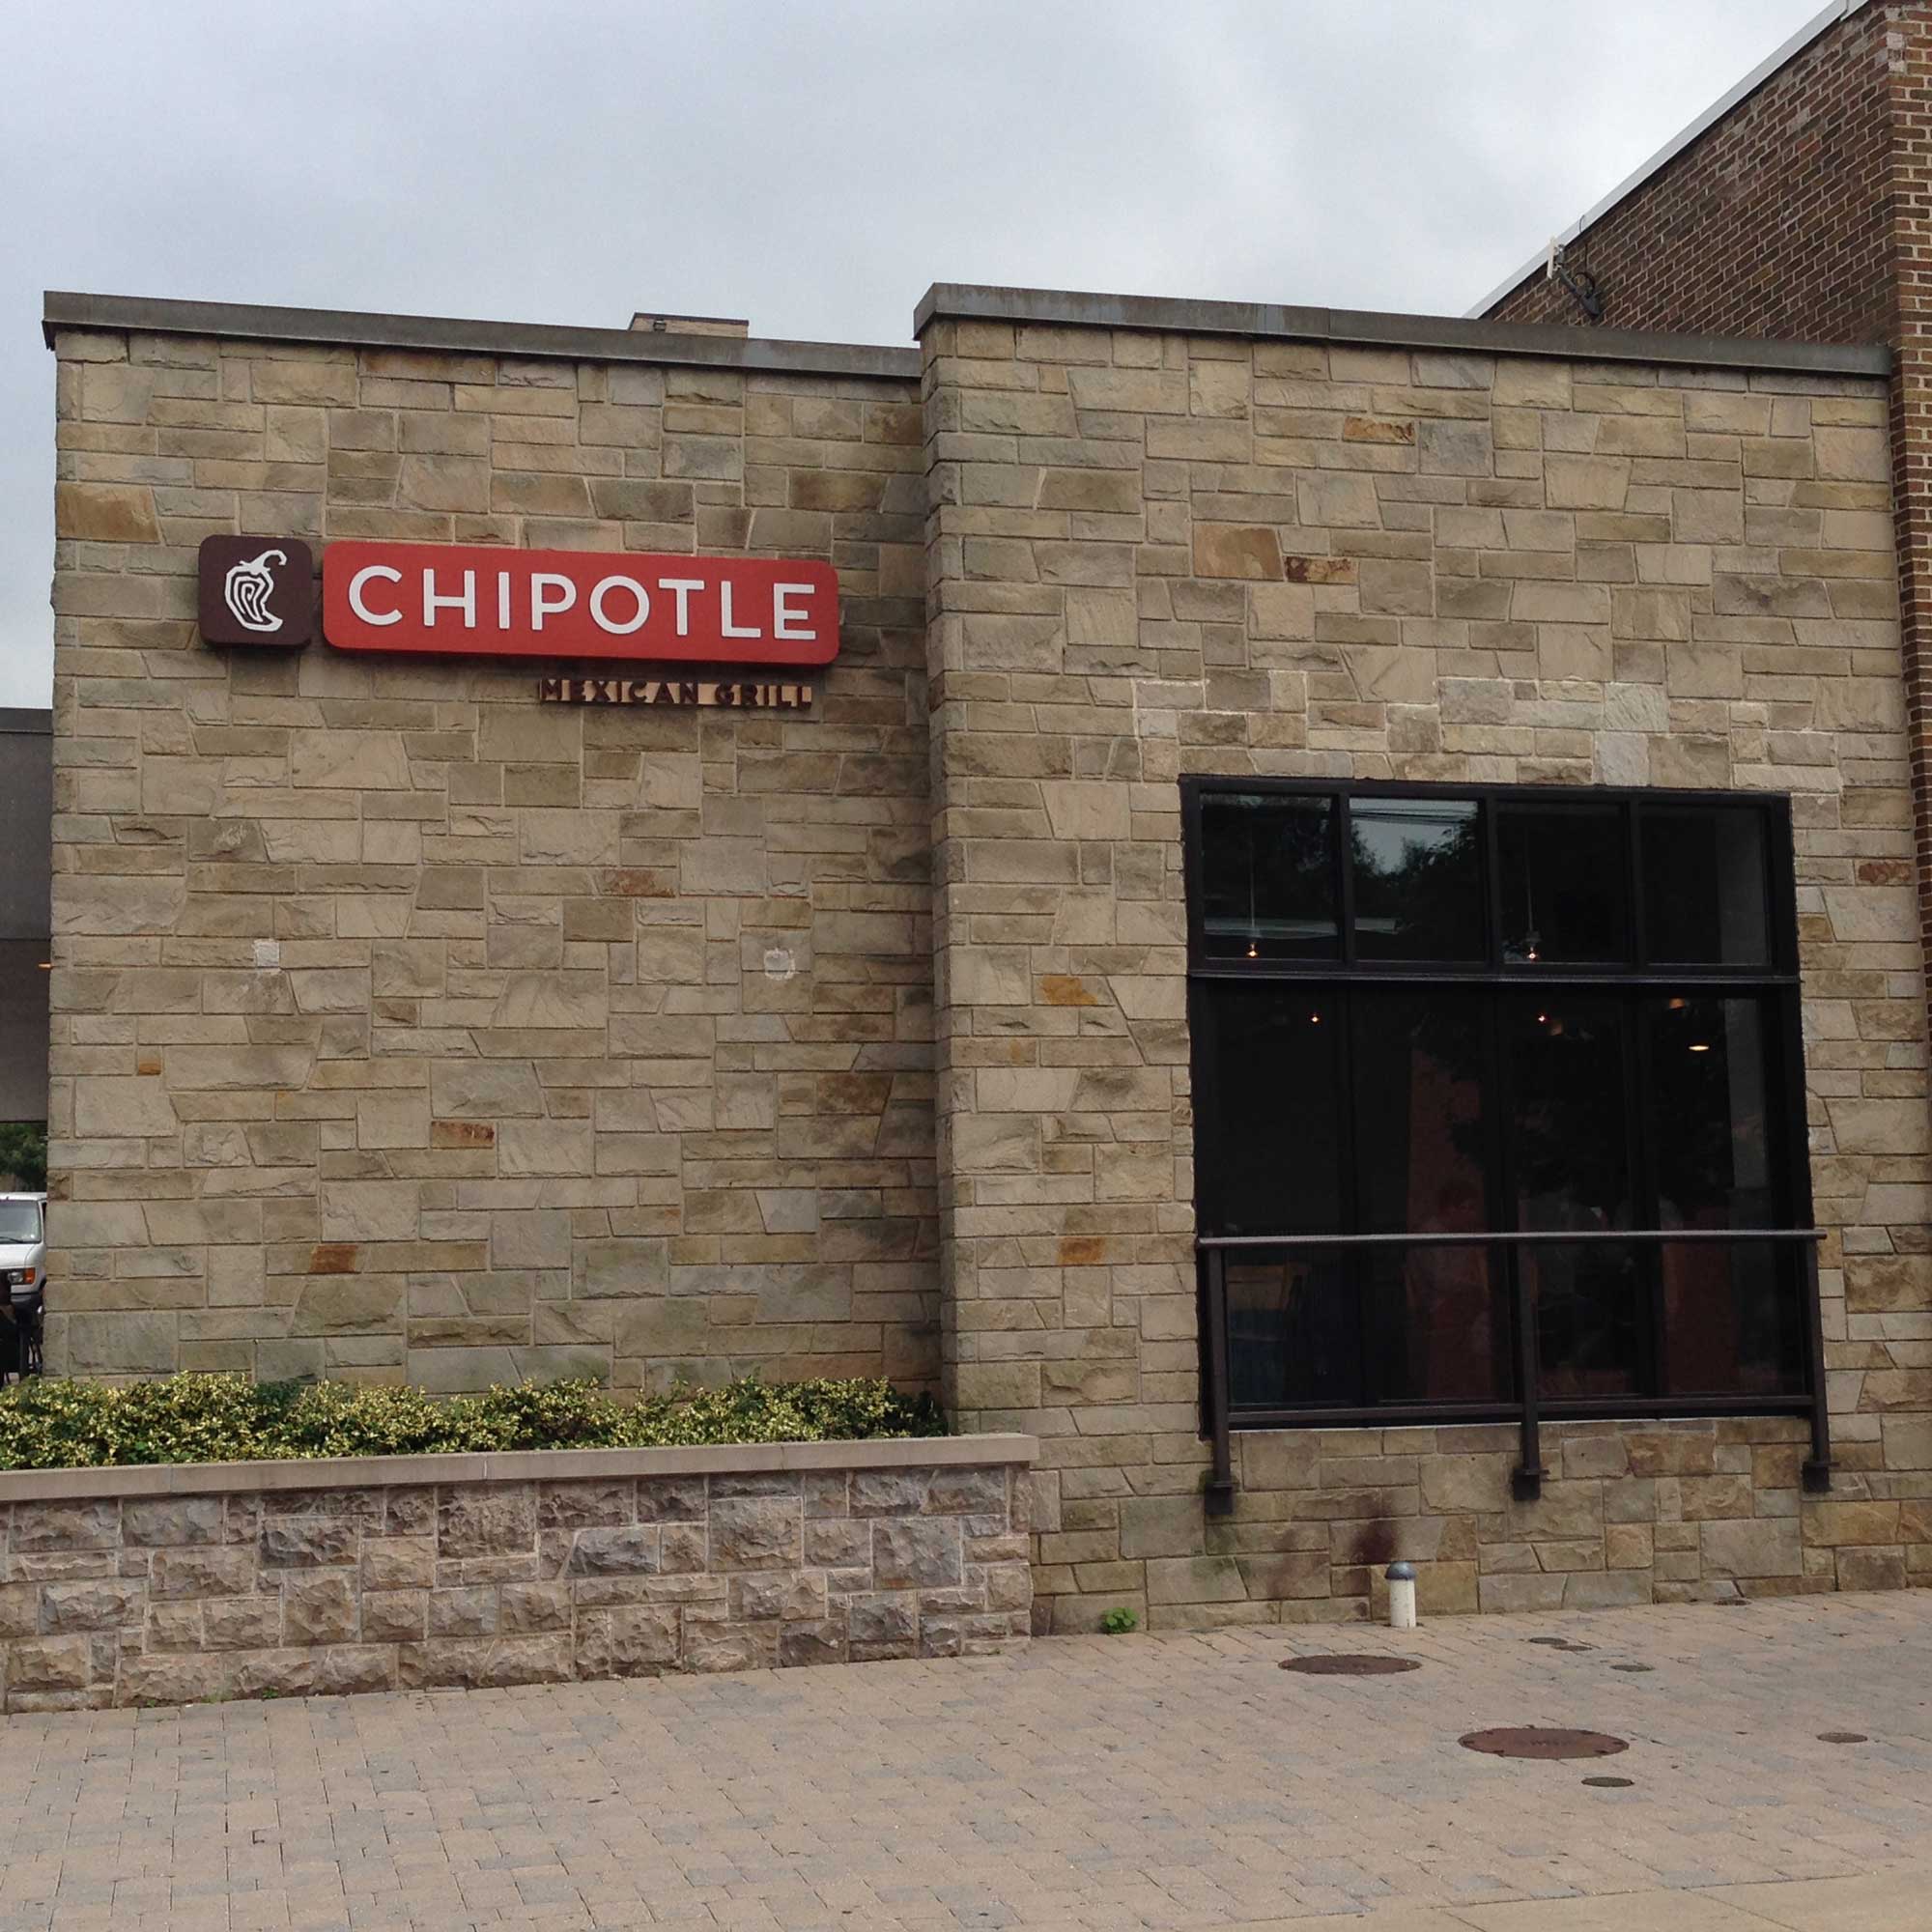 116-Heister-Street,3731-sf,-Chipotle-Mexican-Grill.jpg